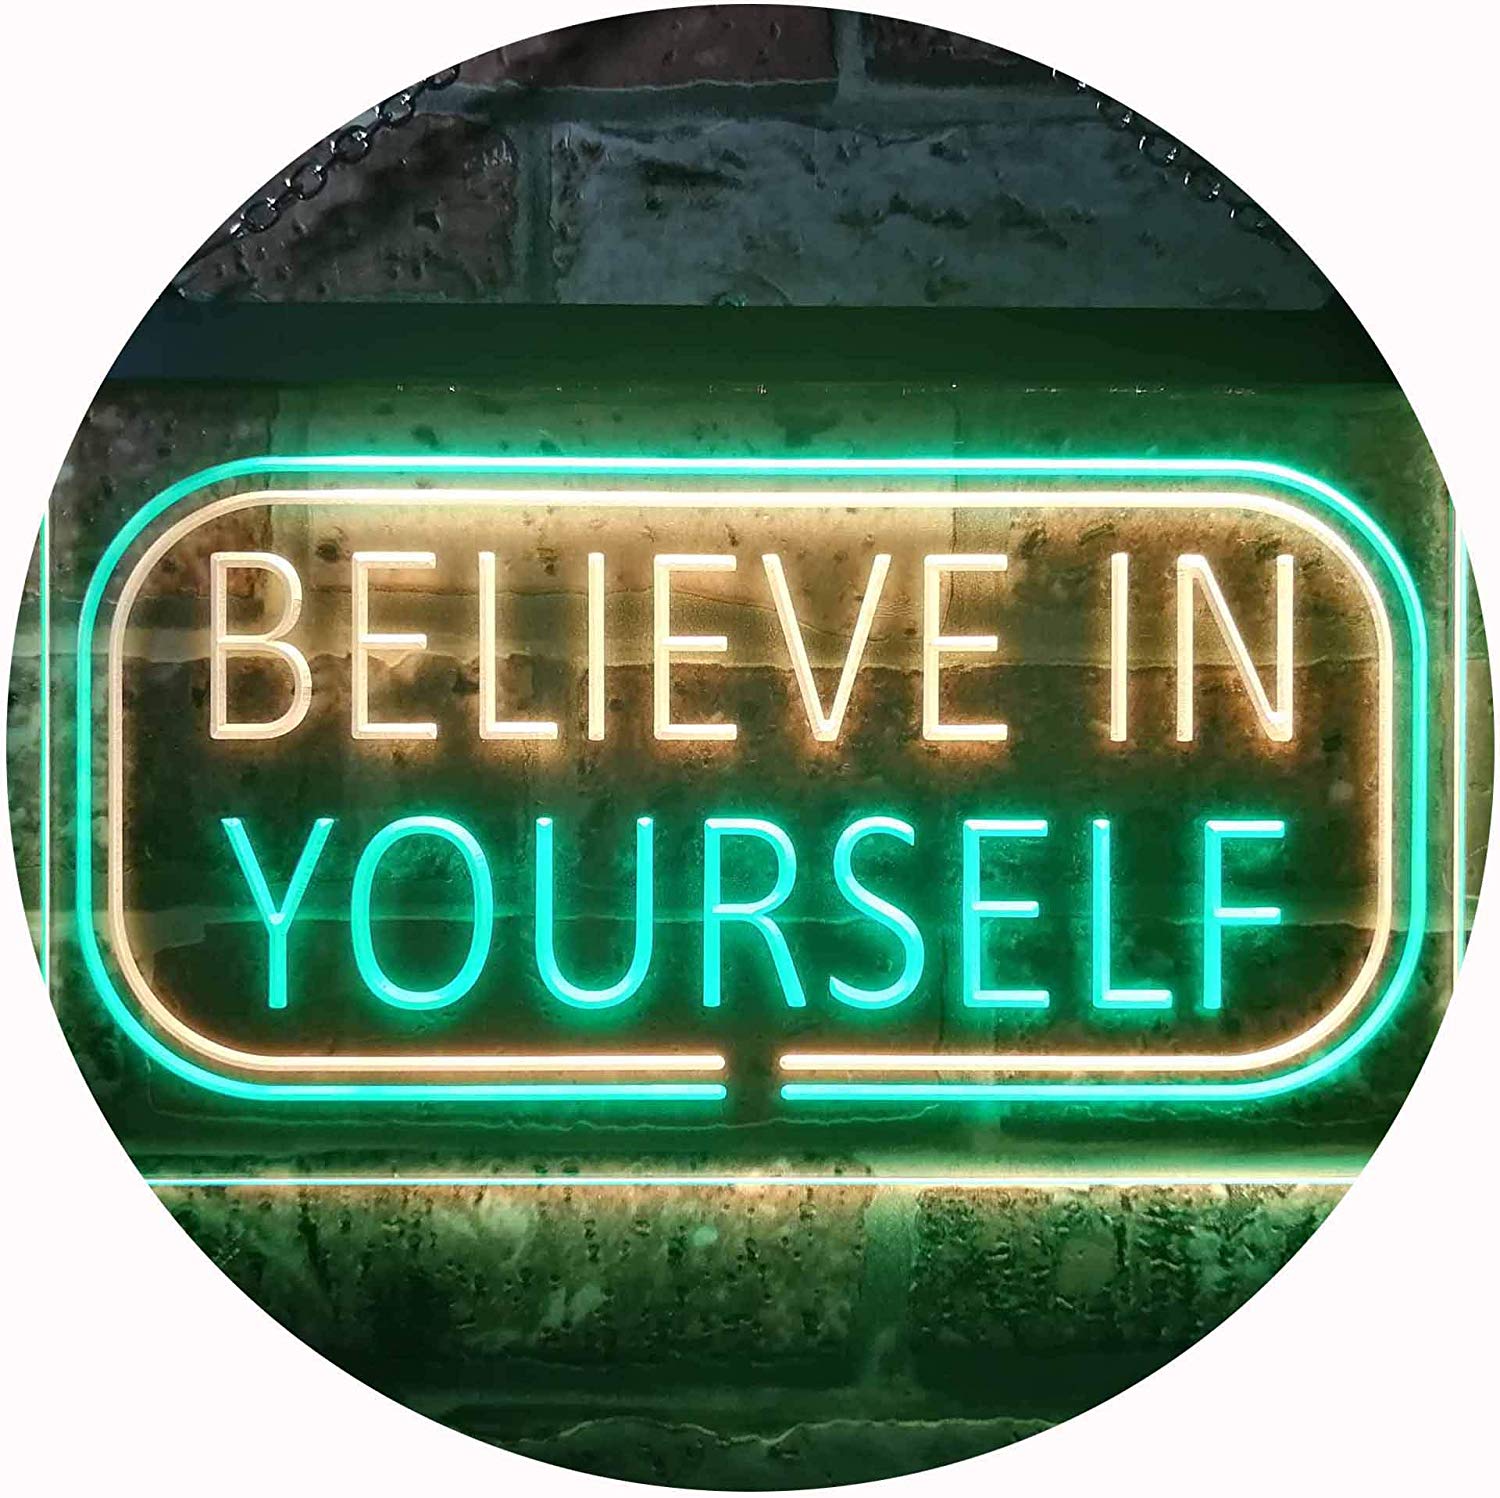 Motivational Quote Believe In Yourself LED Neon Light Sign - Way Up Gifts